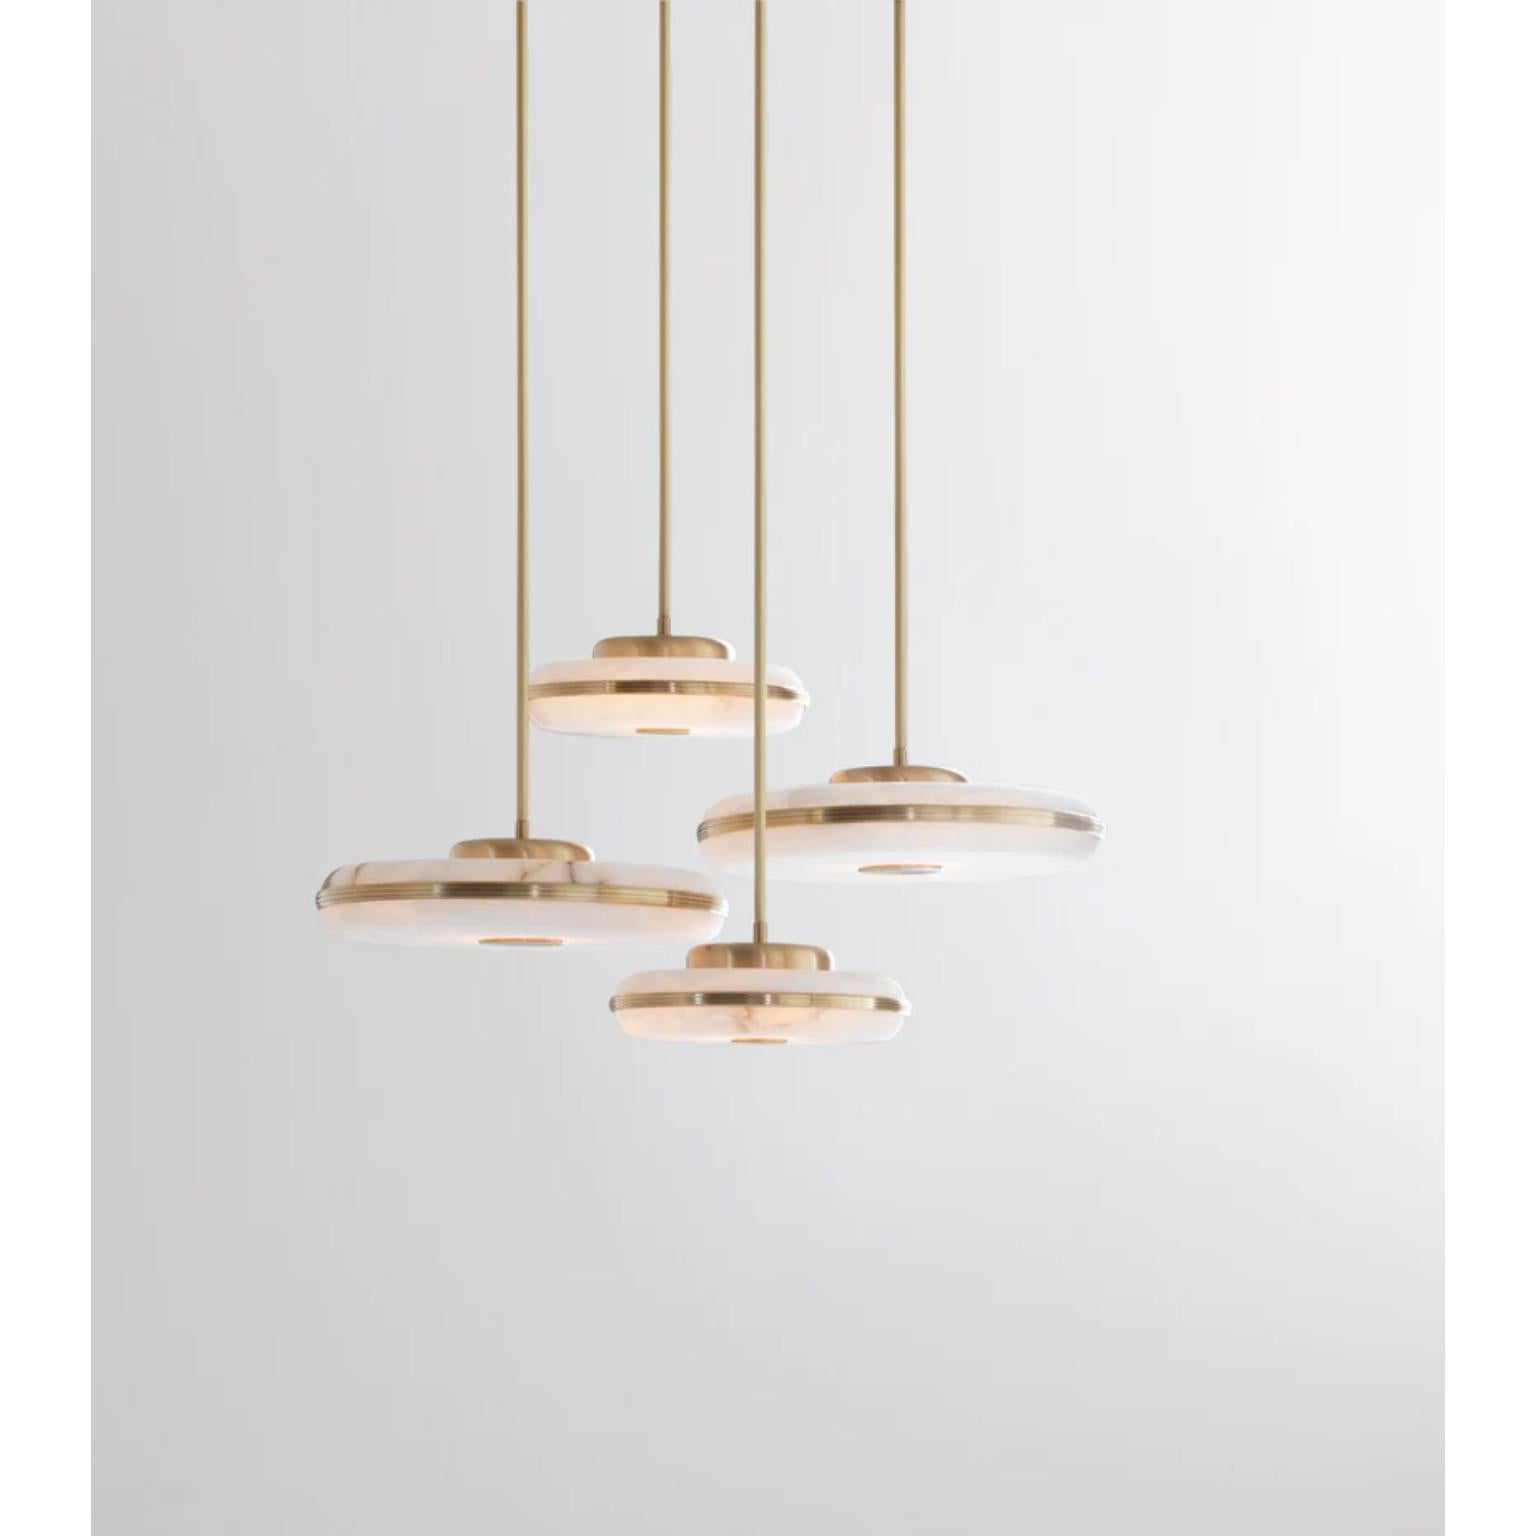 Beran Brushed Brass Chandelier 4 by Bert Frank
Dimensions: Ø 58 x H 100 cm. 
Materials: Brass and alabaster.

Available in two different sizes. Available in different finishes and materials. Height is customized to order. Please contact us. 

For